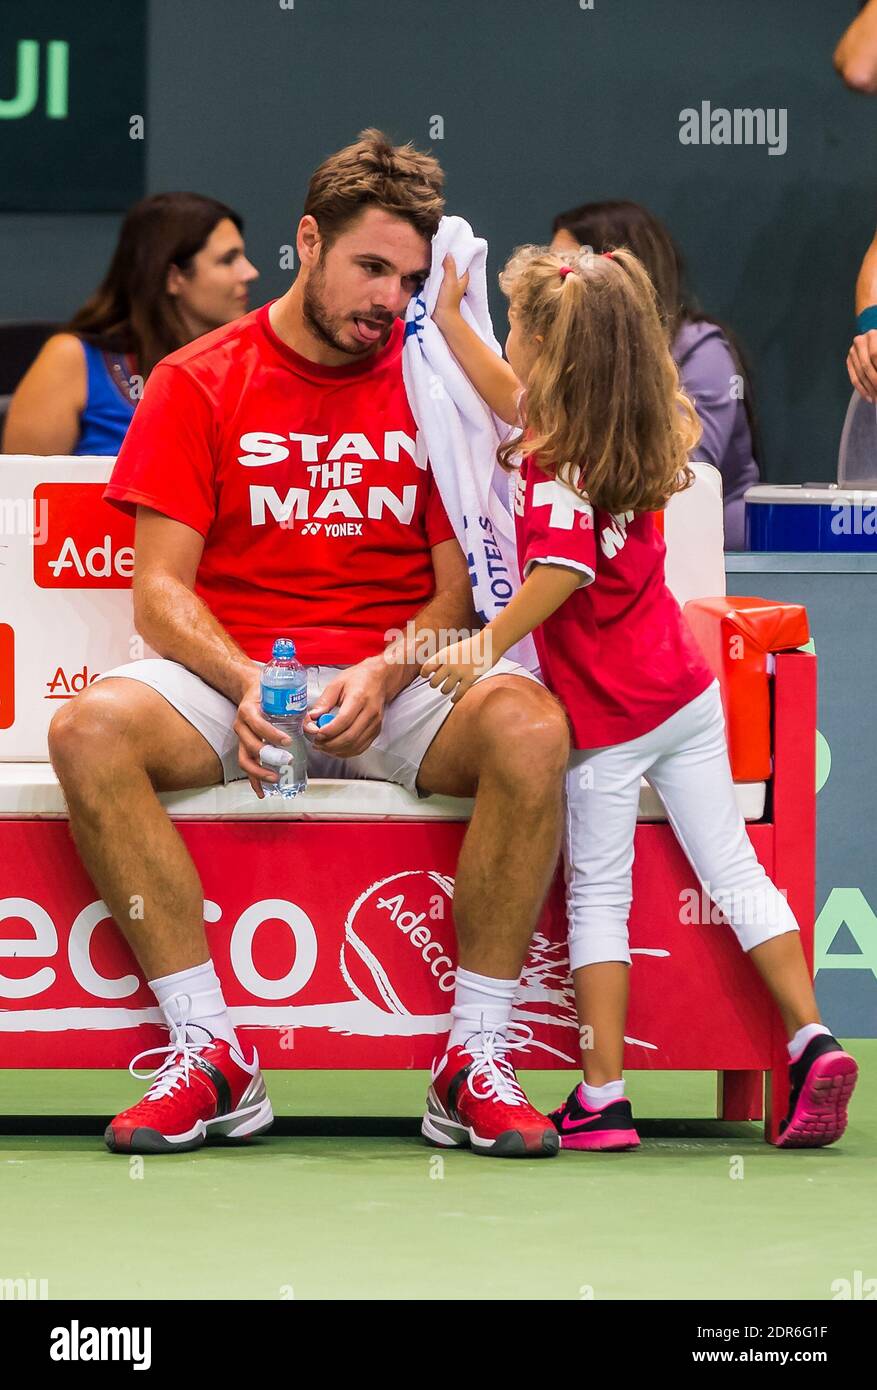 Stanislas 'Stan' Wawrinka during his training session with his daughter Alexia  Wawrinka before the Davis Cup World Group playoff tennis tie match between  Switzerland and the Netherlands in Geneva, Switzerland on September